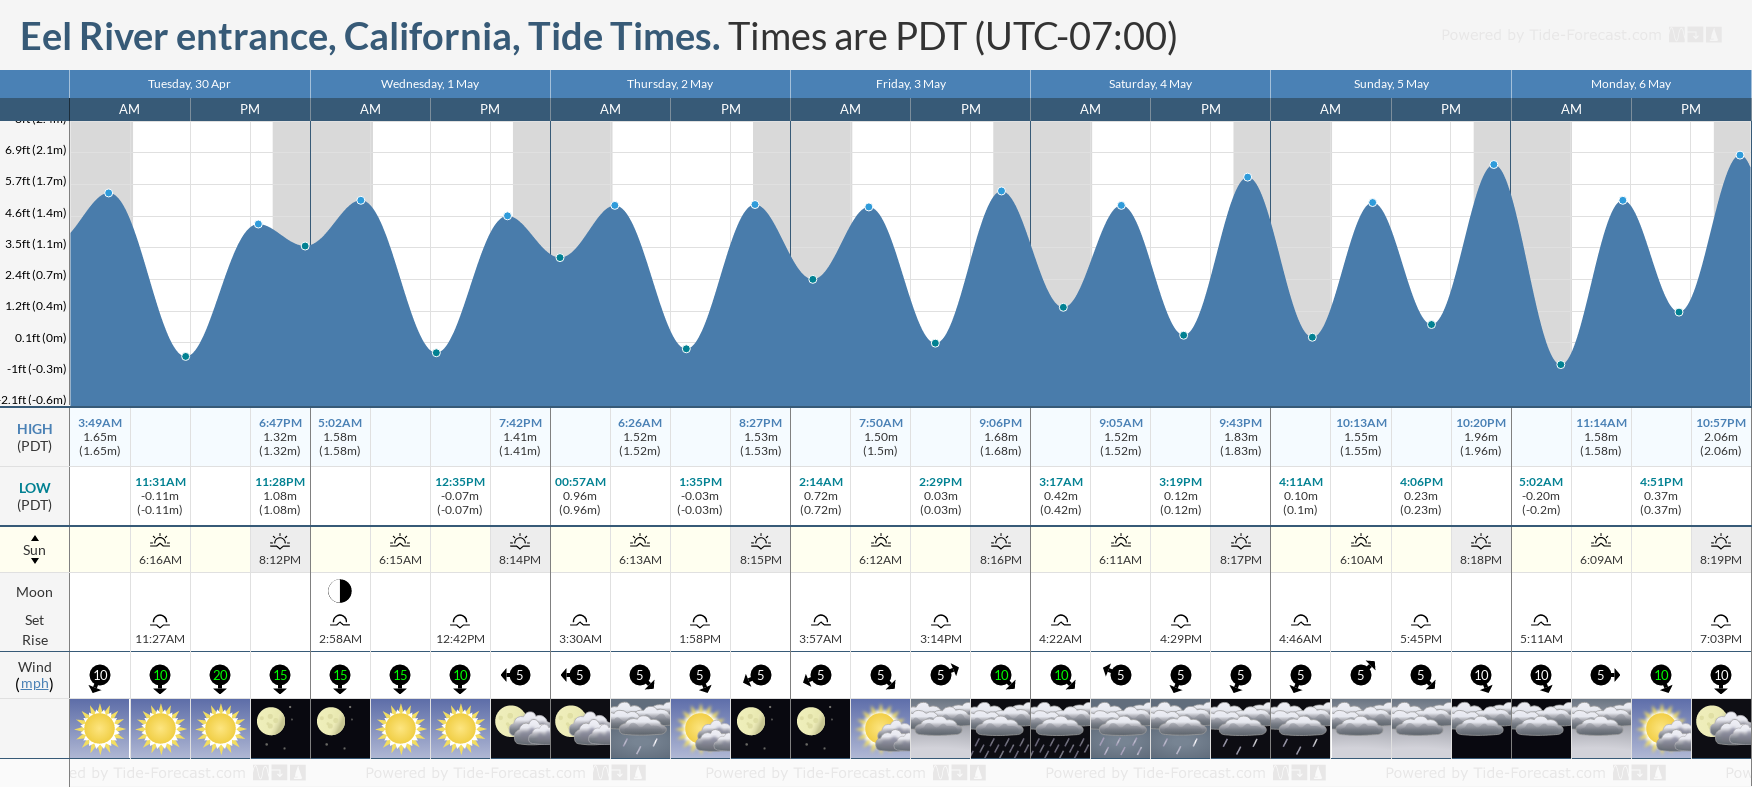 Eel River entrance, California Tide Chart including high and low tide times for the next 7 days